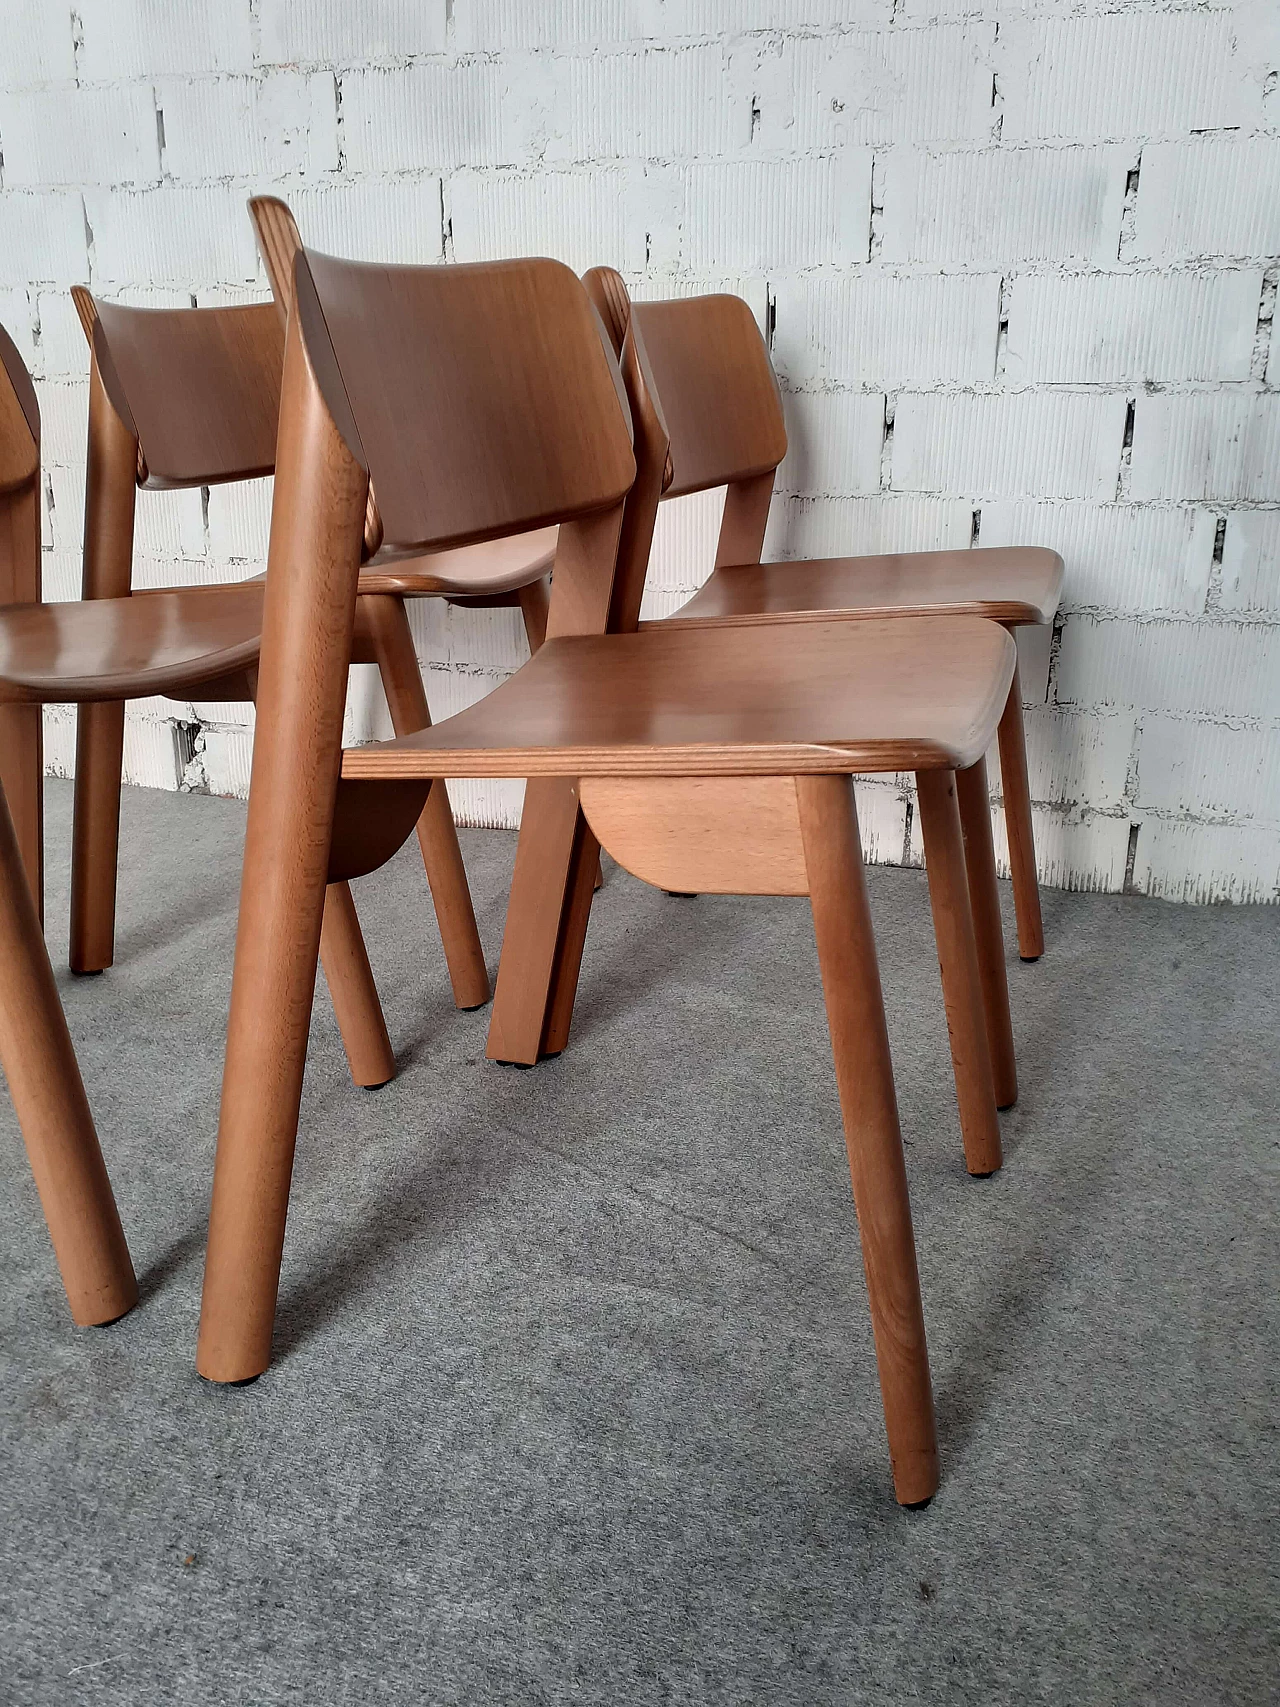 4 Wooden chairs, 1970s 4